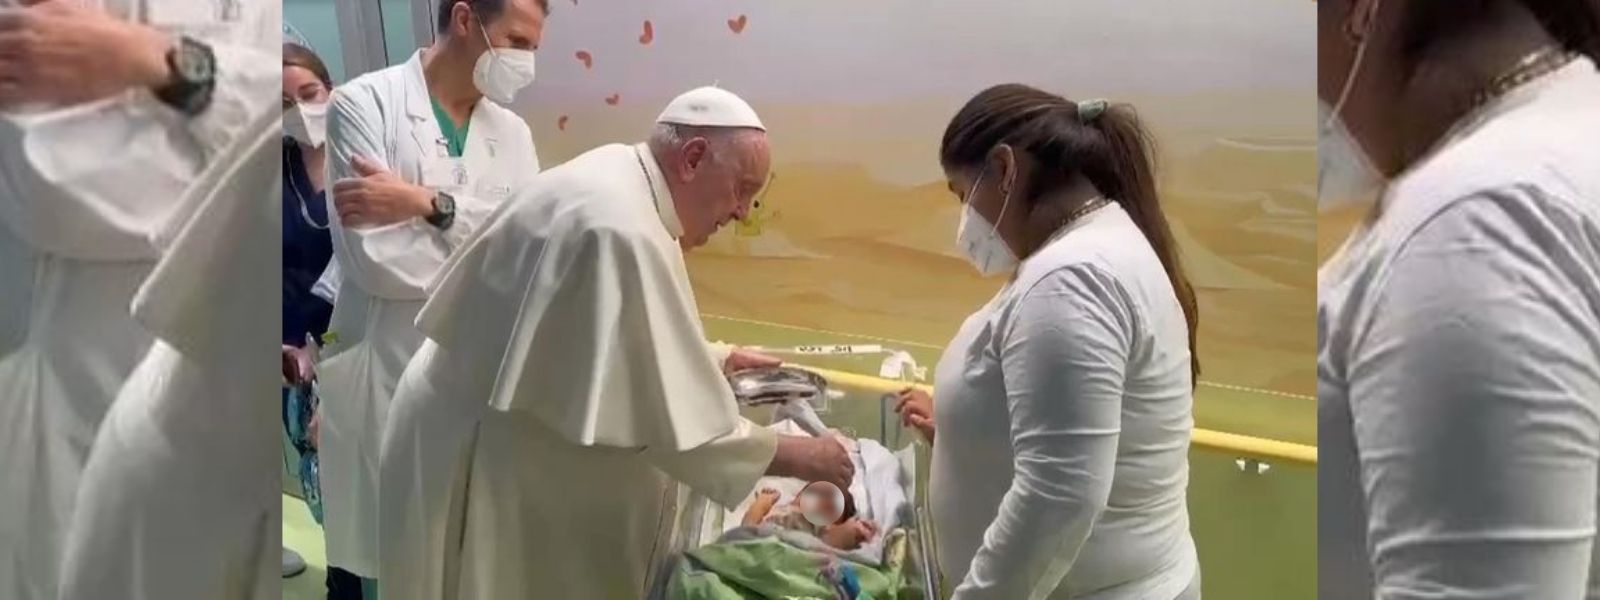 Pope Francis baptises baby while being treated